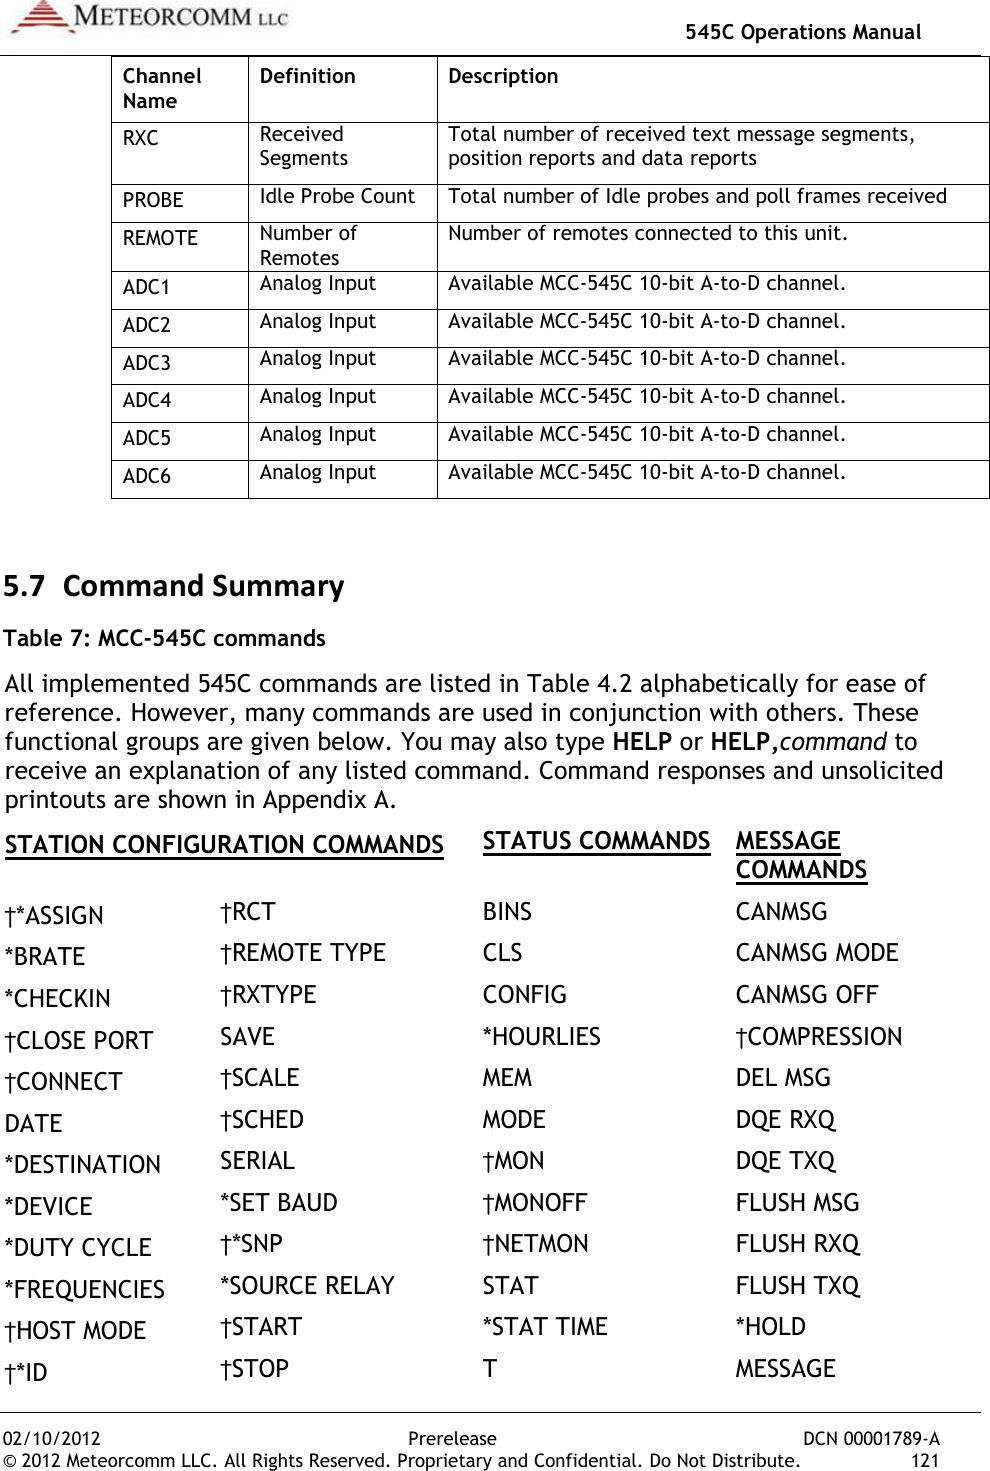   545C Operations Manual 02/10/2012  Prerelease  DCN 00001789-A © 2012 Meteorcomm LLC. All Rights Reserved. Proprietary and Confidential. Do Not Distribute.  121 Channel Name Definition  Description RXC Received Segments Total number of received text message segments, position reports and data reports PROBE Idle Probe Count Total number of Idle probes and poll frames received REMOTE Number of  Remotes Number of remotes connected to this unit. ADC1 Analog Input Available MCC-545C 10-bit A-to-D channel. ADC2 Analog Input Available MCC-545C 10-bit A-to-D channel. ADC3 Analog Input Available MCC-545C 10-bit A-to-D channel. ADC4 Analog Input Available MCC-545C 10-bit A-to-D channel. ADC5 Analog Input Available MCC-545C 10-bit A-to-D channel. ADC6 Analog Input Available MCC-545C 10-bit A-to-D channel. 5.7 Command Summary Table 7: MCC-545C commands All implemented 545C commands are listed in Table 4.2 alphabetically for ease of reference. However, many commands are used in conjunction with others. These functional groups are given below. You may also type HELP or HELP,command to receive an explanation of any listed command. Command responses and unsolicited printouts are shown in Appendix A. STATION CONFIGURATION COMMANDS STATUS COMMANDS MESSAGE COMMANDS †*ASSIGN †RCT BINS CANMSG *BRATE †REMOTE TYPE CLS CANMSG MODE *CHECKIN †RXTYPE CONFIG CANMSG OFF †CLOSE PORT SAVE *HOURLIES †COMPRESSION †CONNECT †SCALE MEM DEL MSG DATE †SCHED MODE DQE RXQ *DESTINATION SERIAL †MON DQE TXQ *DEVICE *SET BAUD †MONOFF FLUSH MSG *DUTY CYCLE †*SNP †NETMON FLUSH RXQ *FREQUENCIES *SOURCE RELAY STAT FLUSH TXQ †HOST MODE †START *STAT TIME *HOLD †*ID †STOP T MESSAGE 